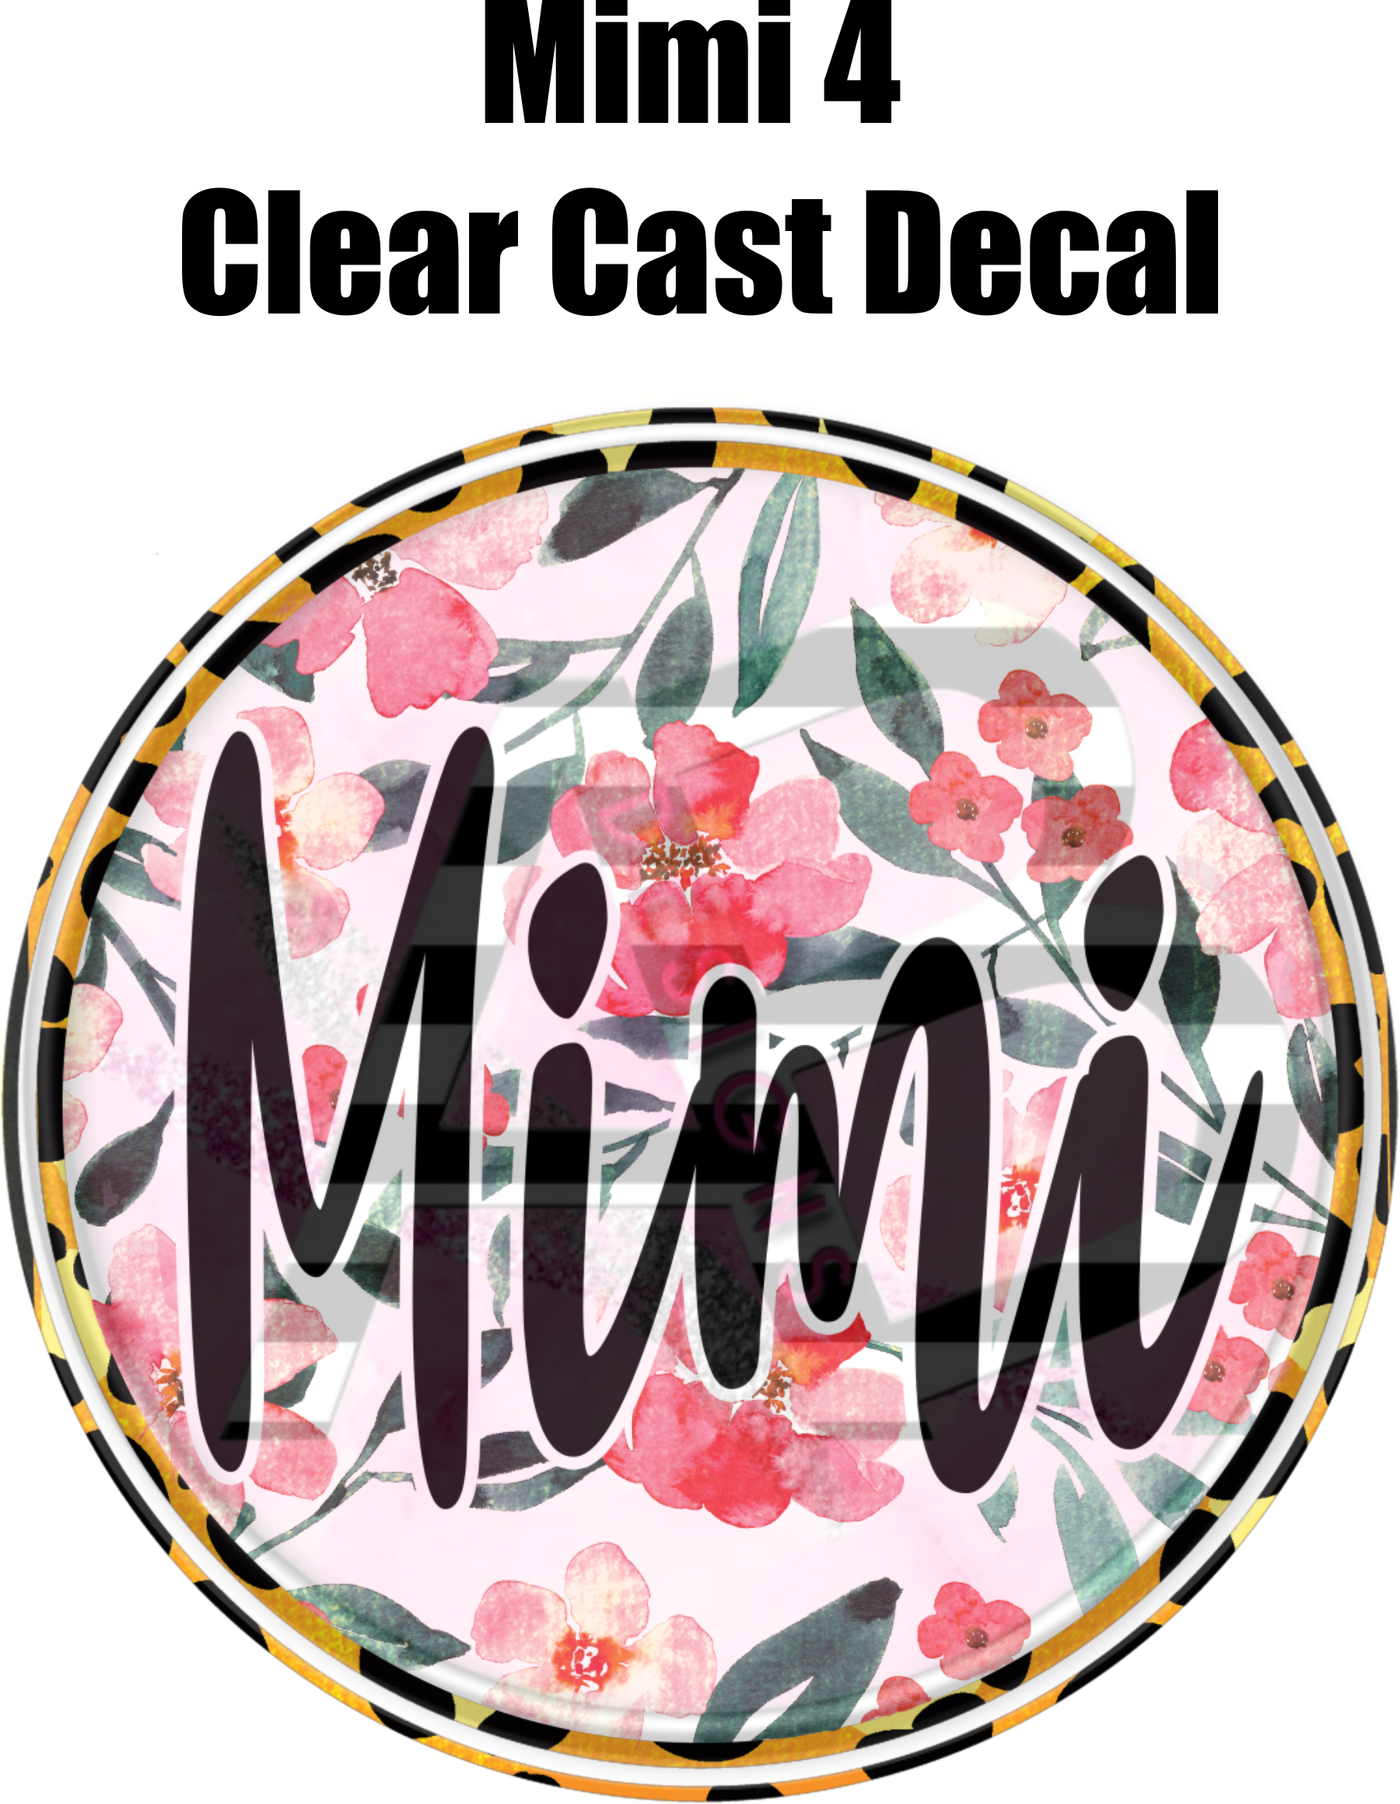 Mimi 4 - Clear Cast Decal